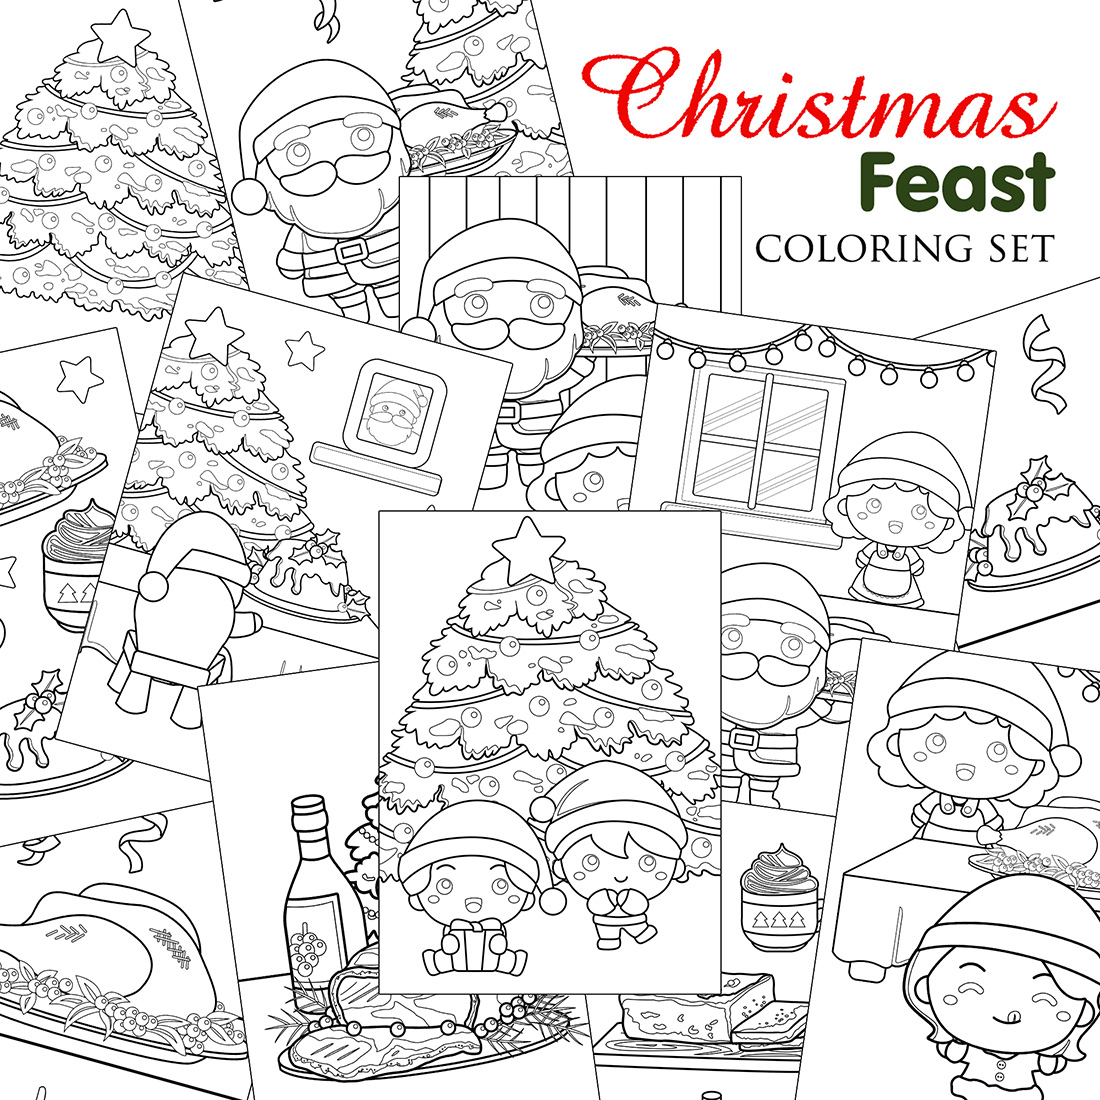 Cute Santa Claus Christmas Tree Feast Dinner Celebration Party Holiday Food with Family Coloring Pages for Kids and Adult cover image.